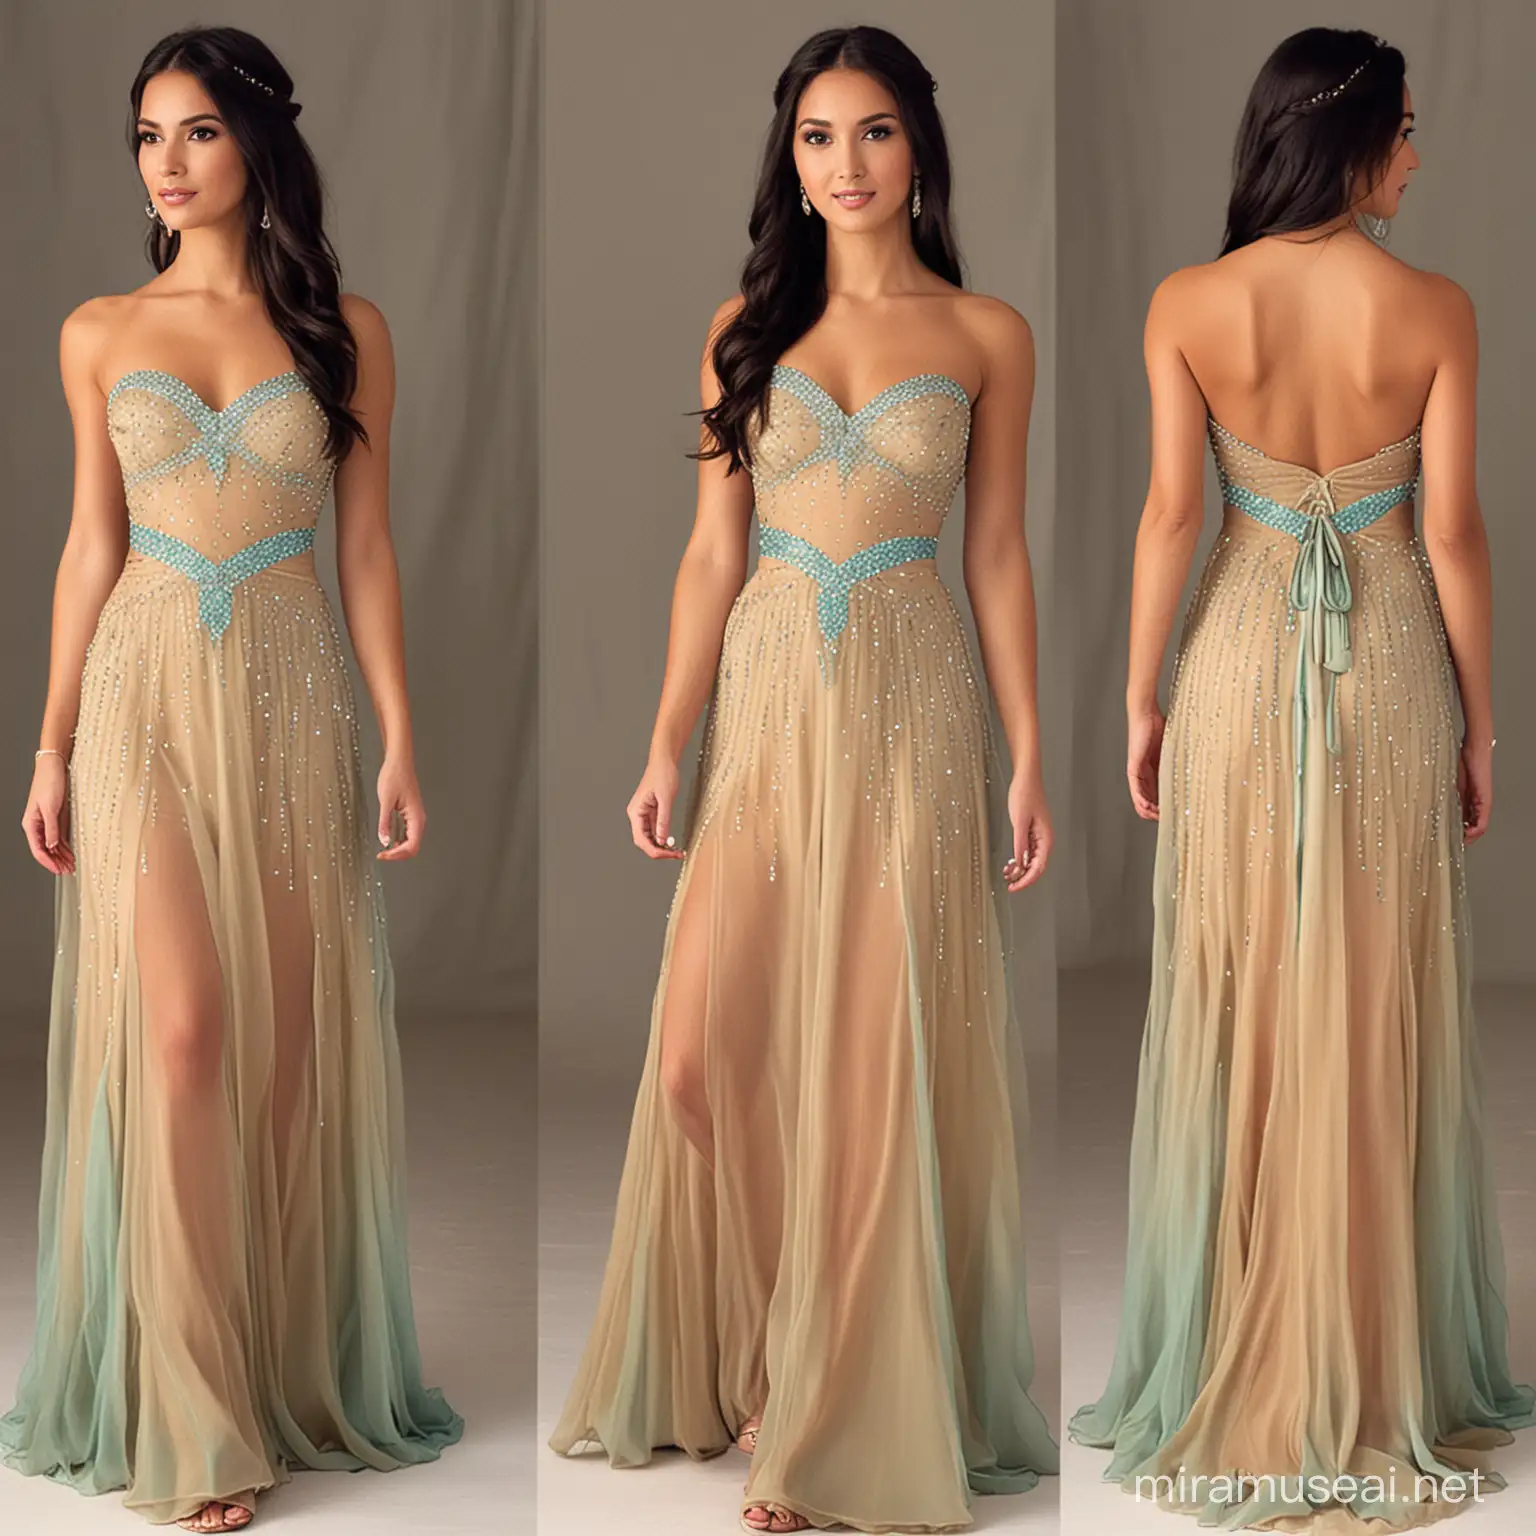 Prom dress Inspired by Pocahontas.